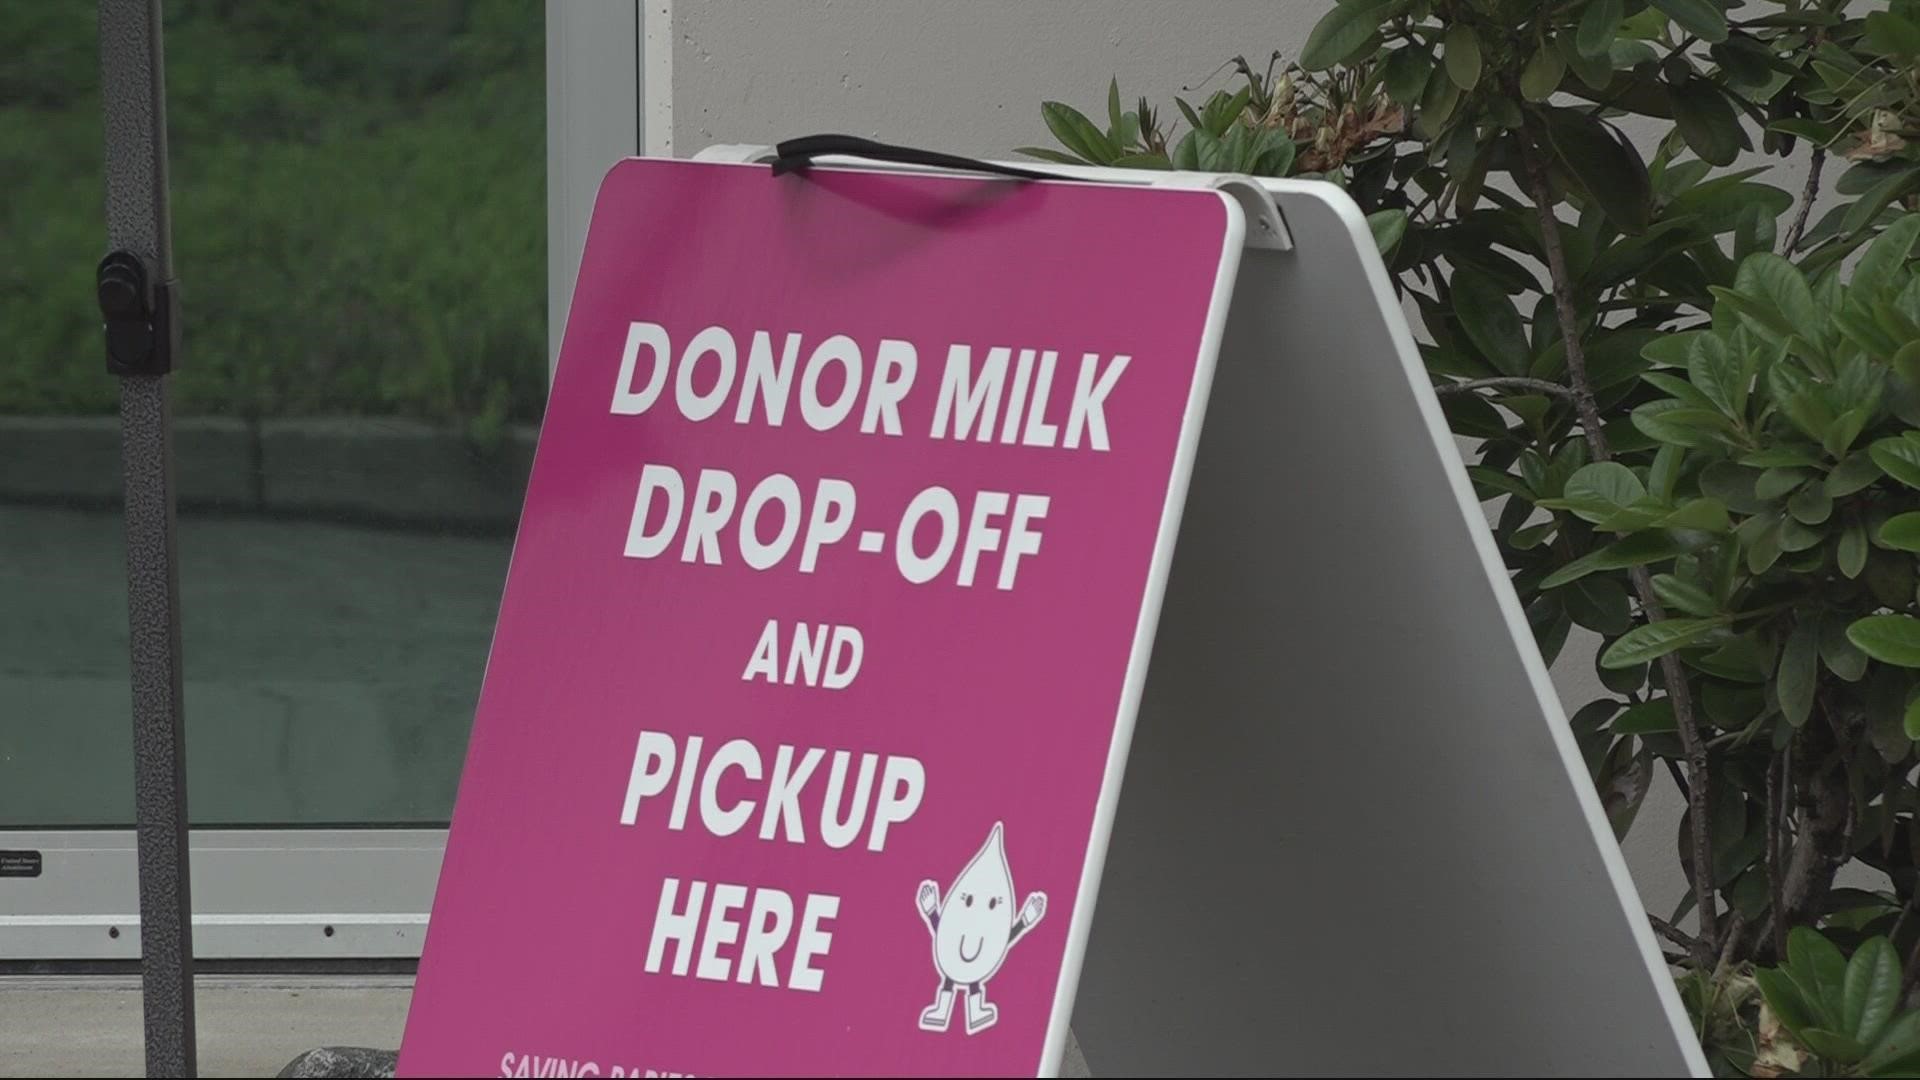 Northwest Mothers Milk Bank opened in Tigard nine years ago. They supply milk to 75 hospitals across the region, as well as to the local community.